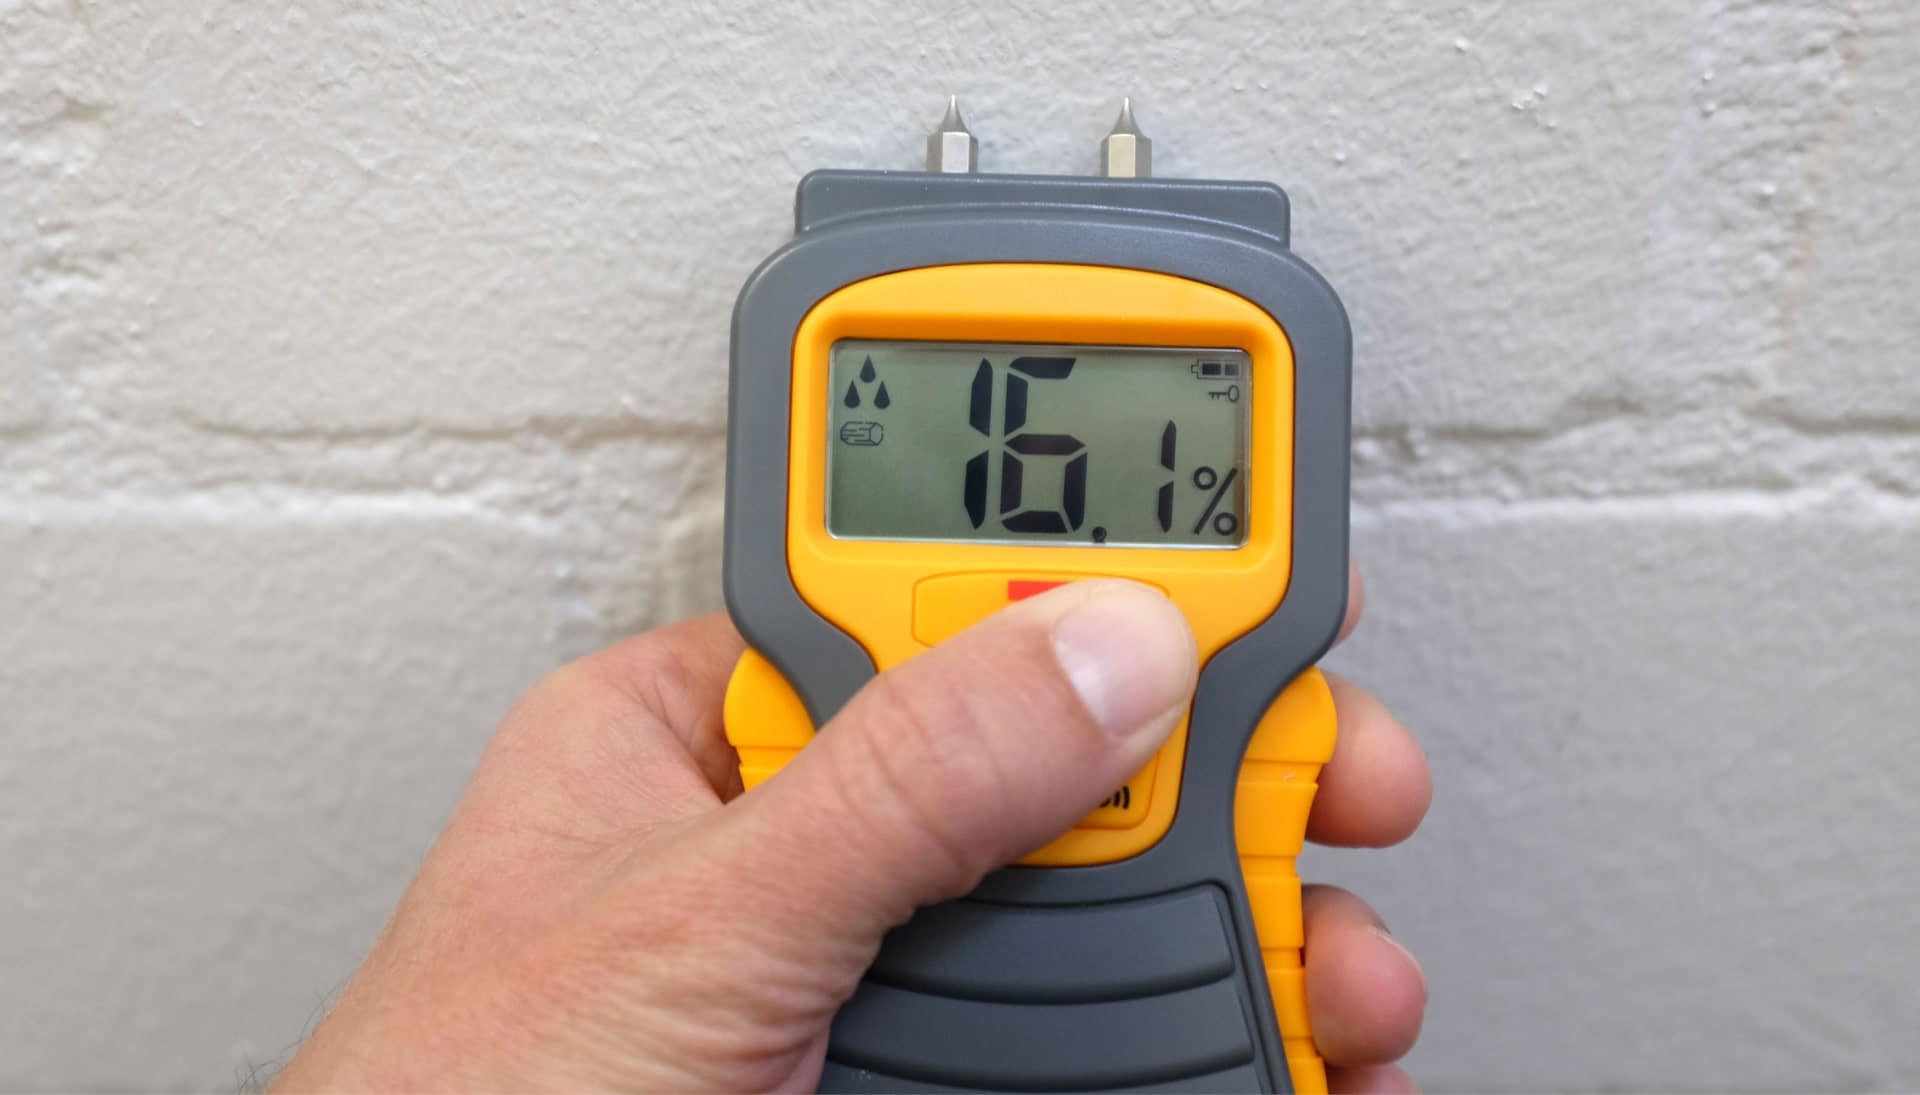 We provide fast, accurate, and affordable mold testing services in Garland, TX.